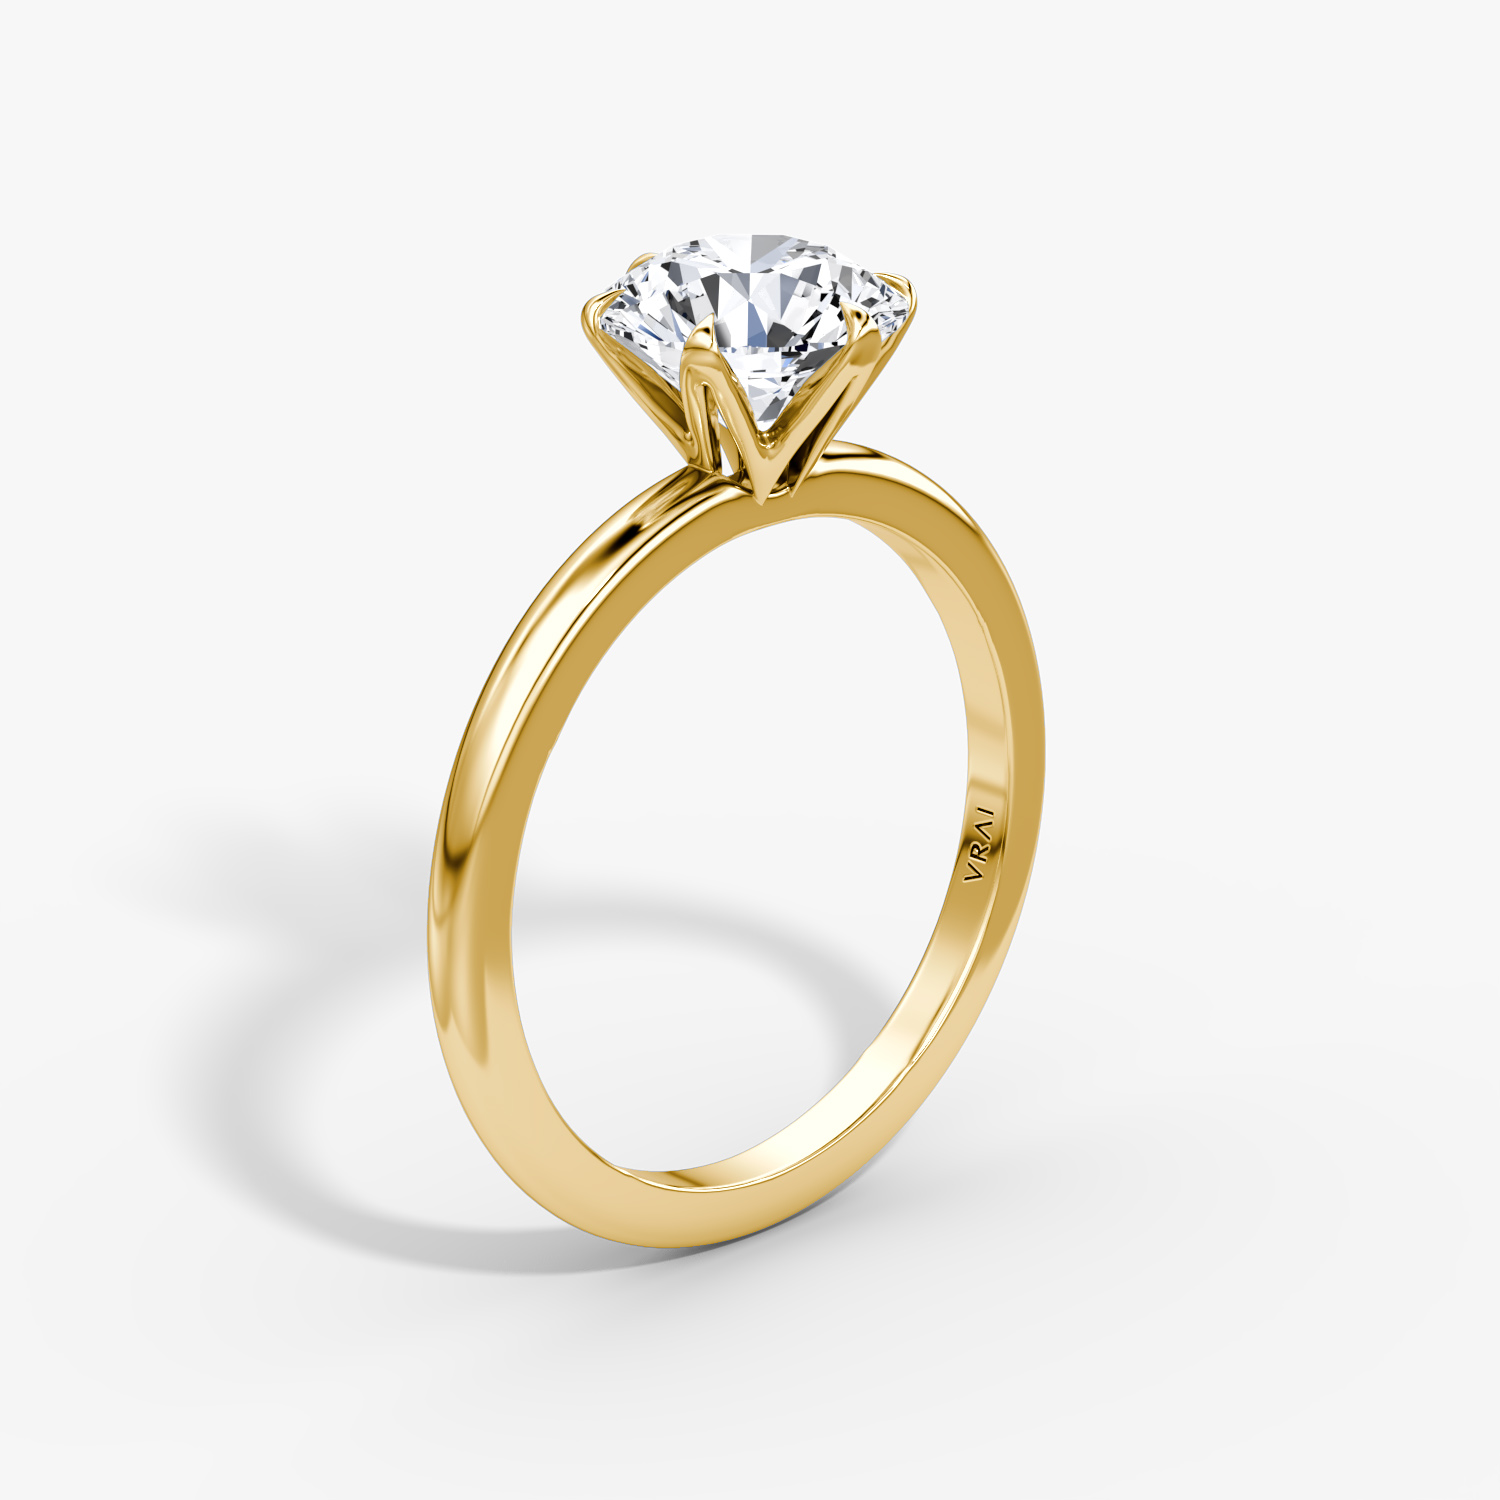 Pavé Diamond Engagement Ring Settings: A Complete Guide